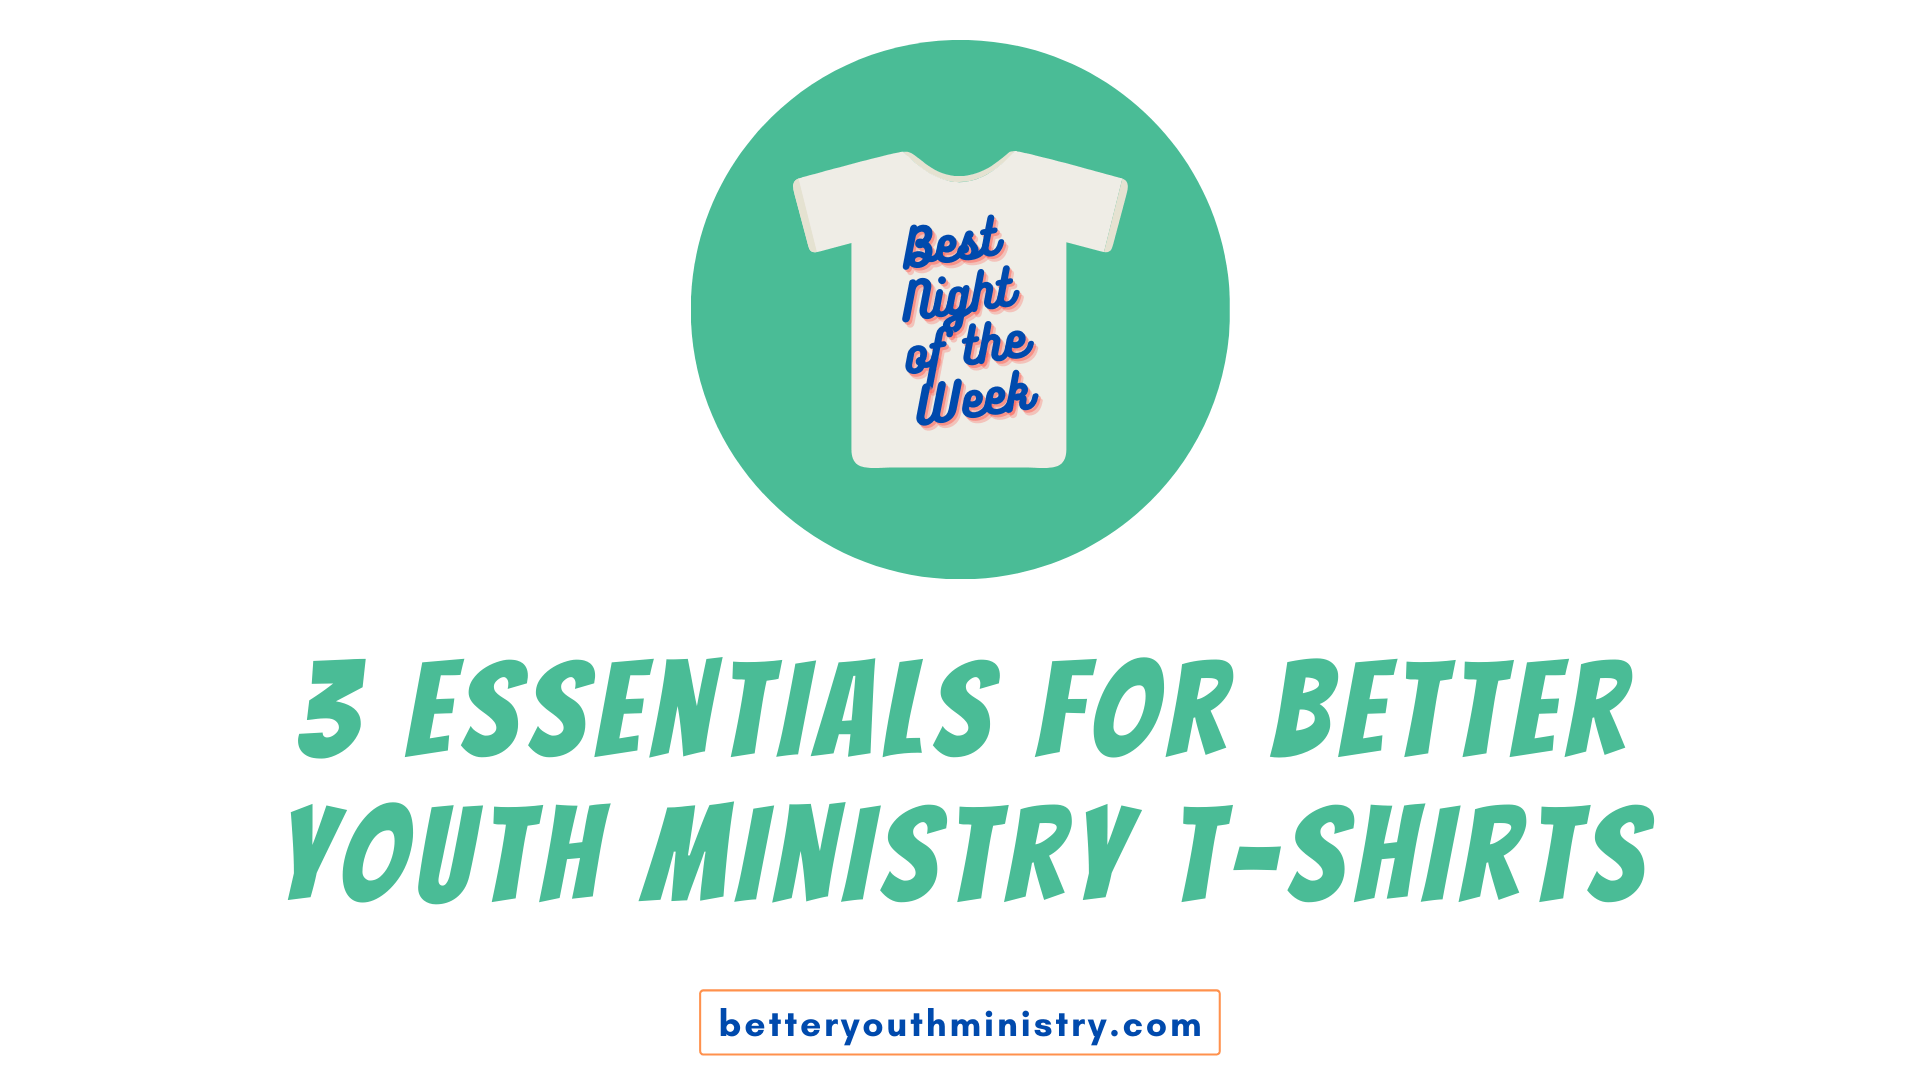 3 Essentials for Better Youth Ministry T-Shirts